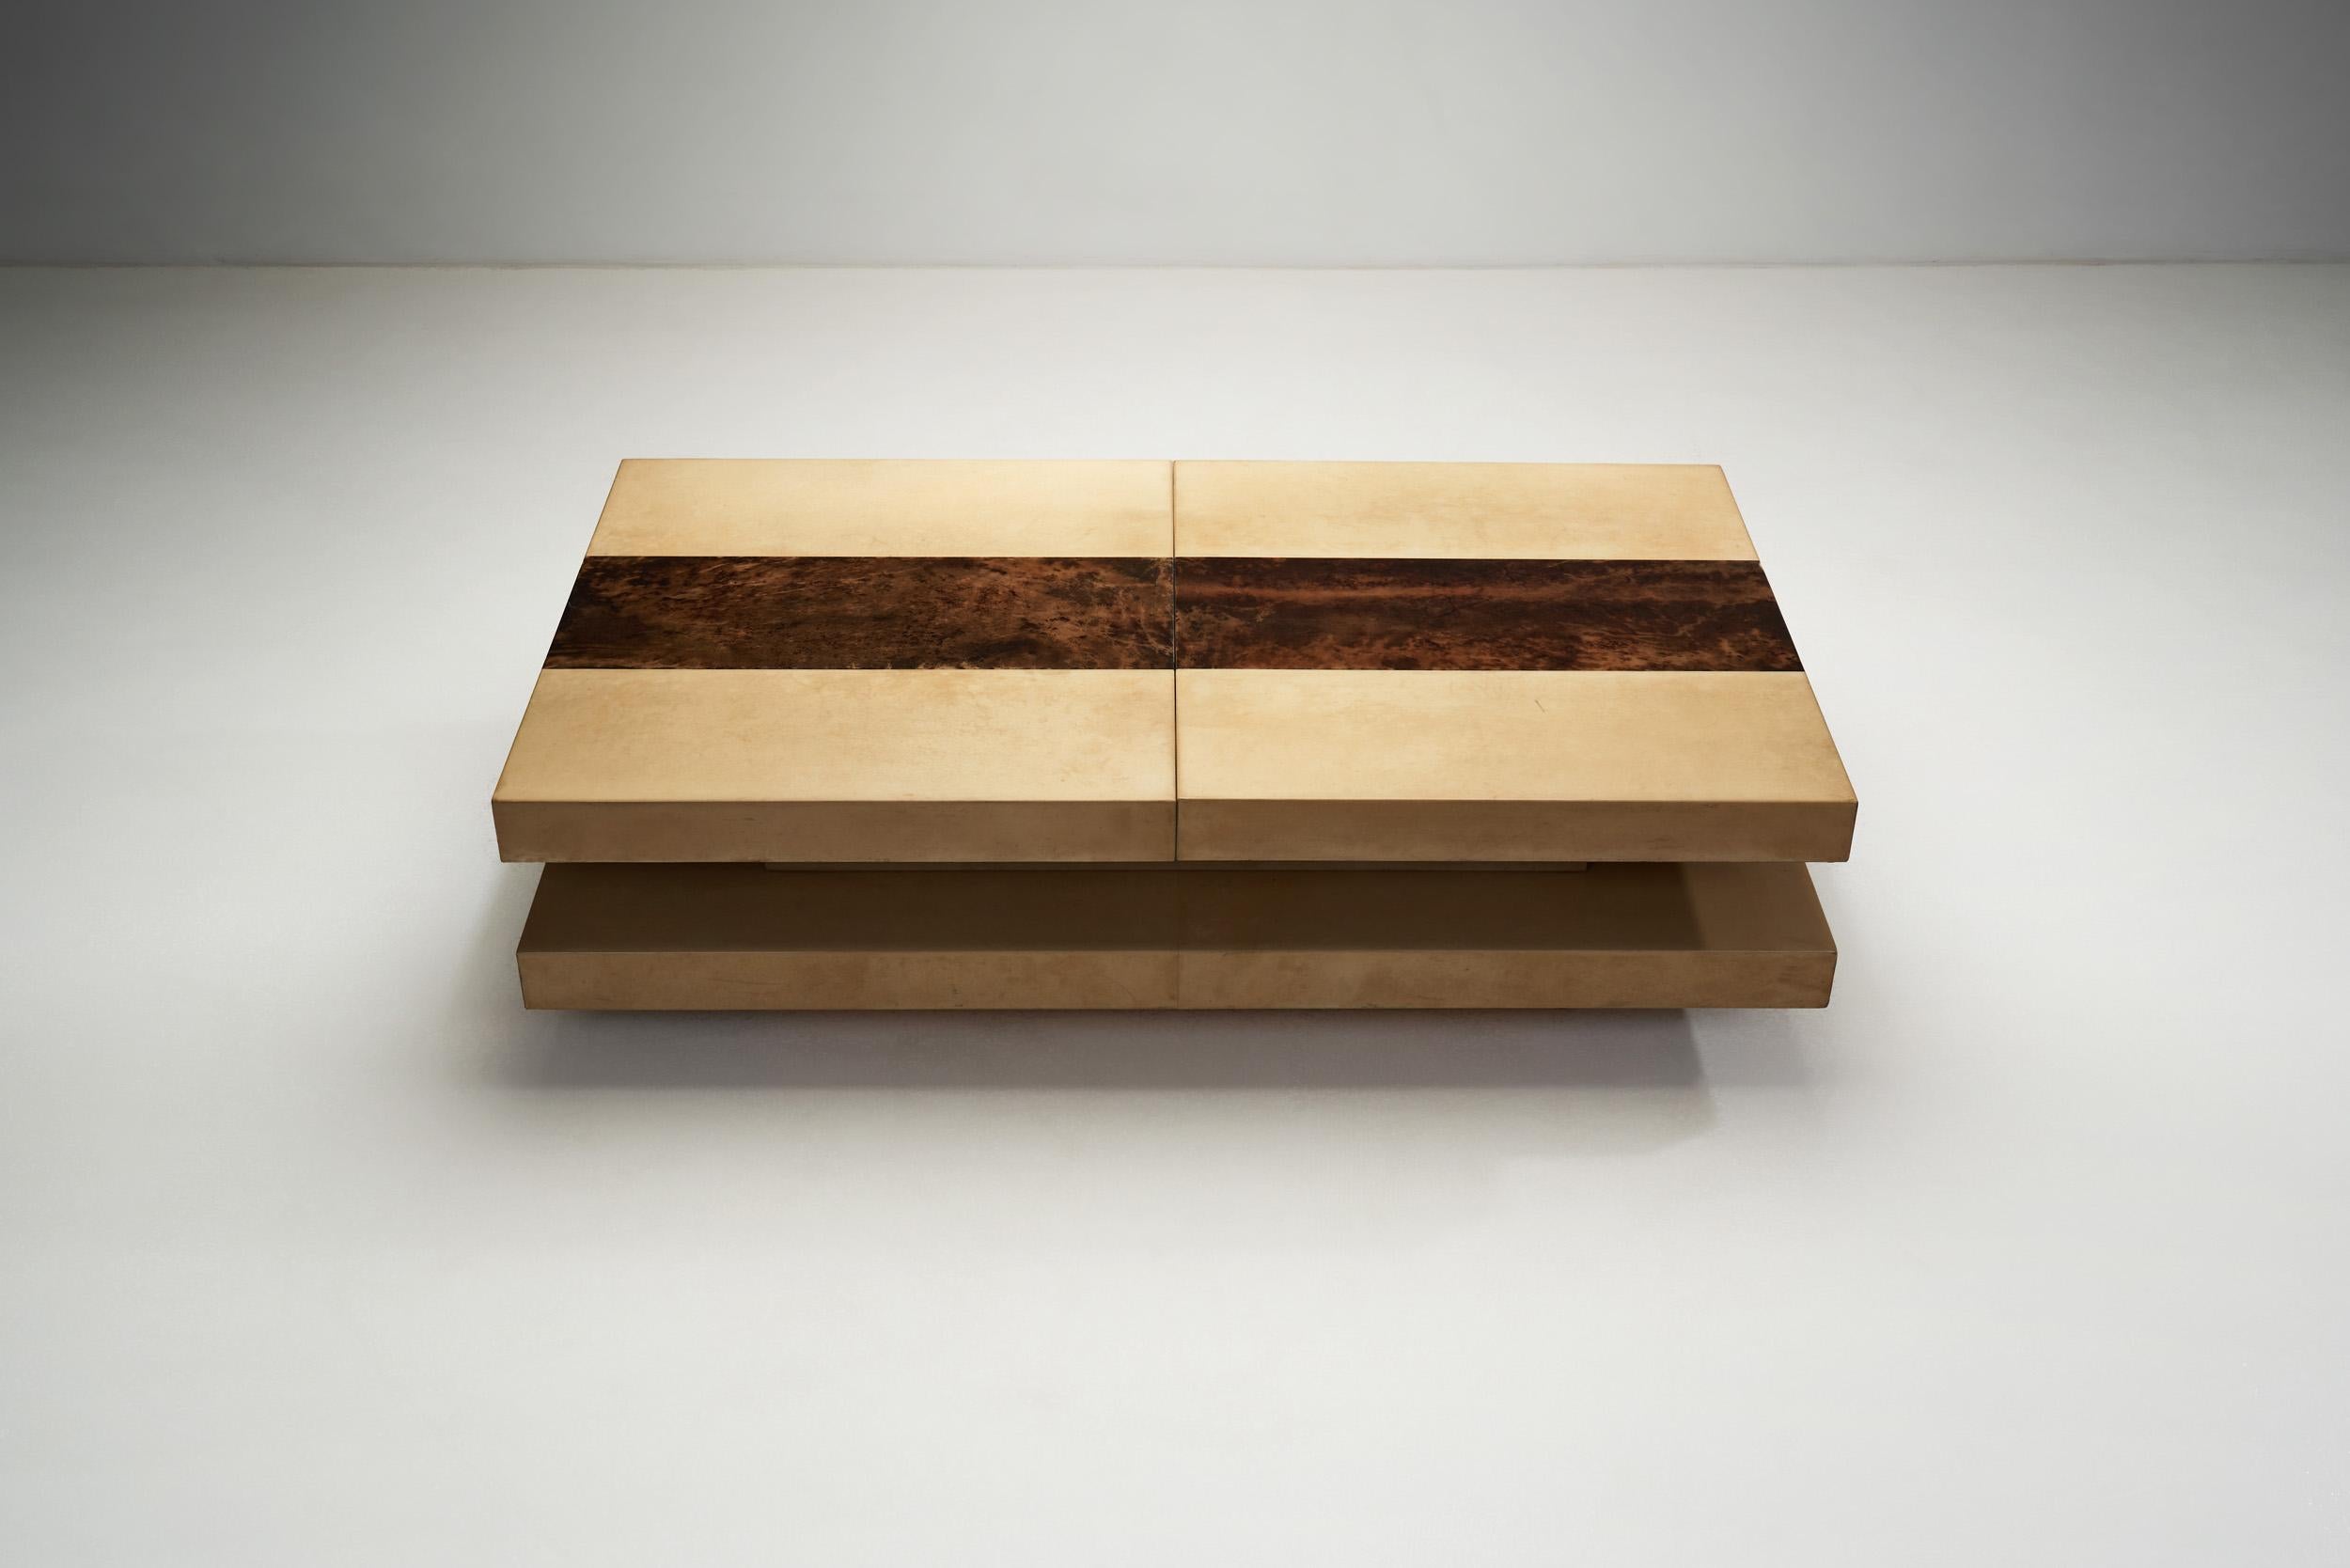 Wood Two-Tiered Sliding Coffee Table with Hidden Bar by Aldo Tura, Italy 1970s For Sale